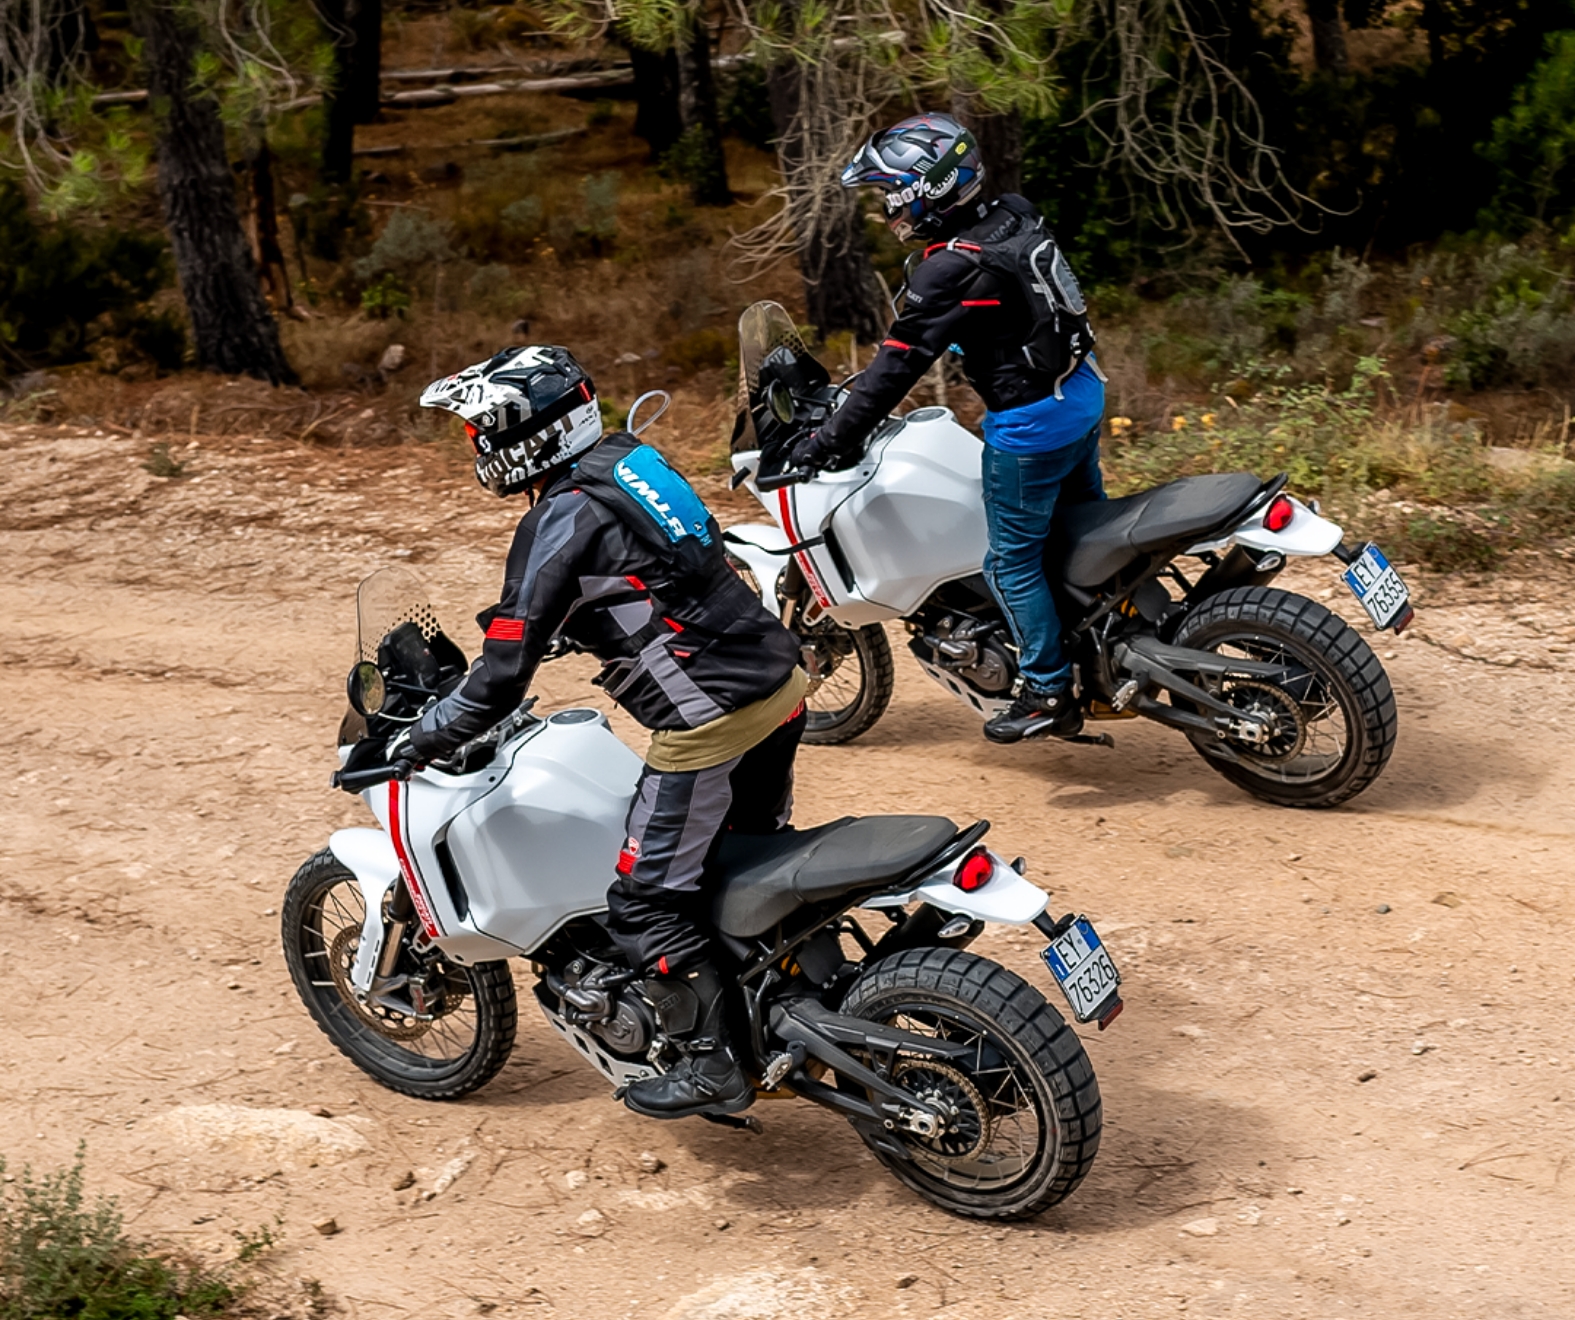 Learning the basics of off-road riding